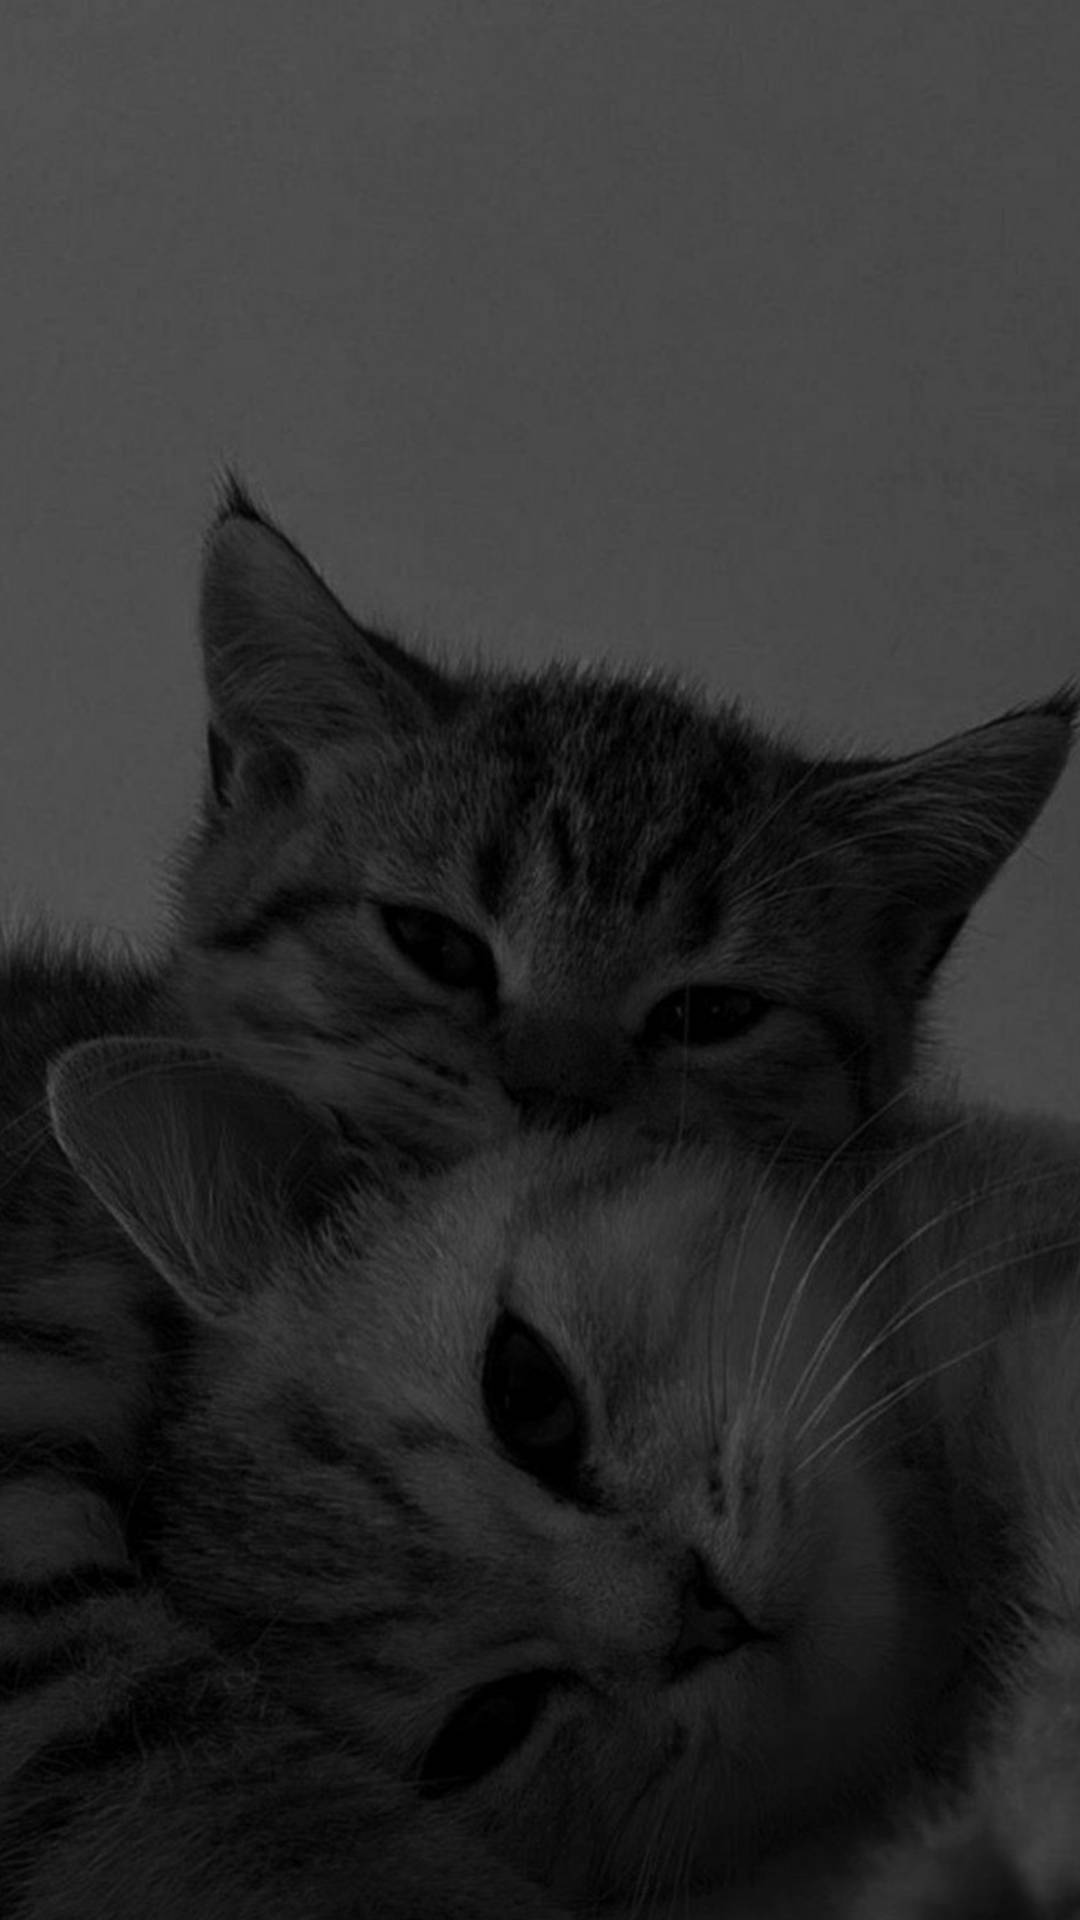 Cute Cat Aesthetic Cuddling Together